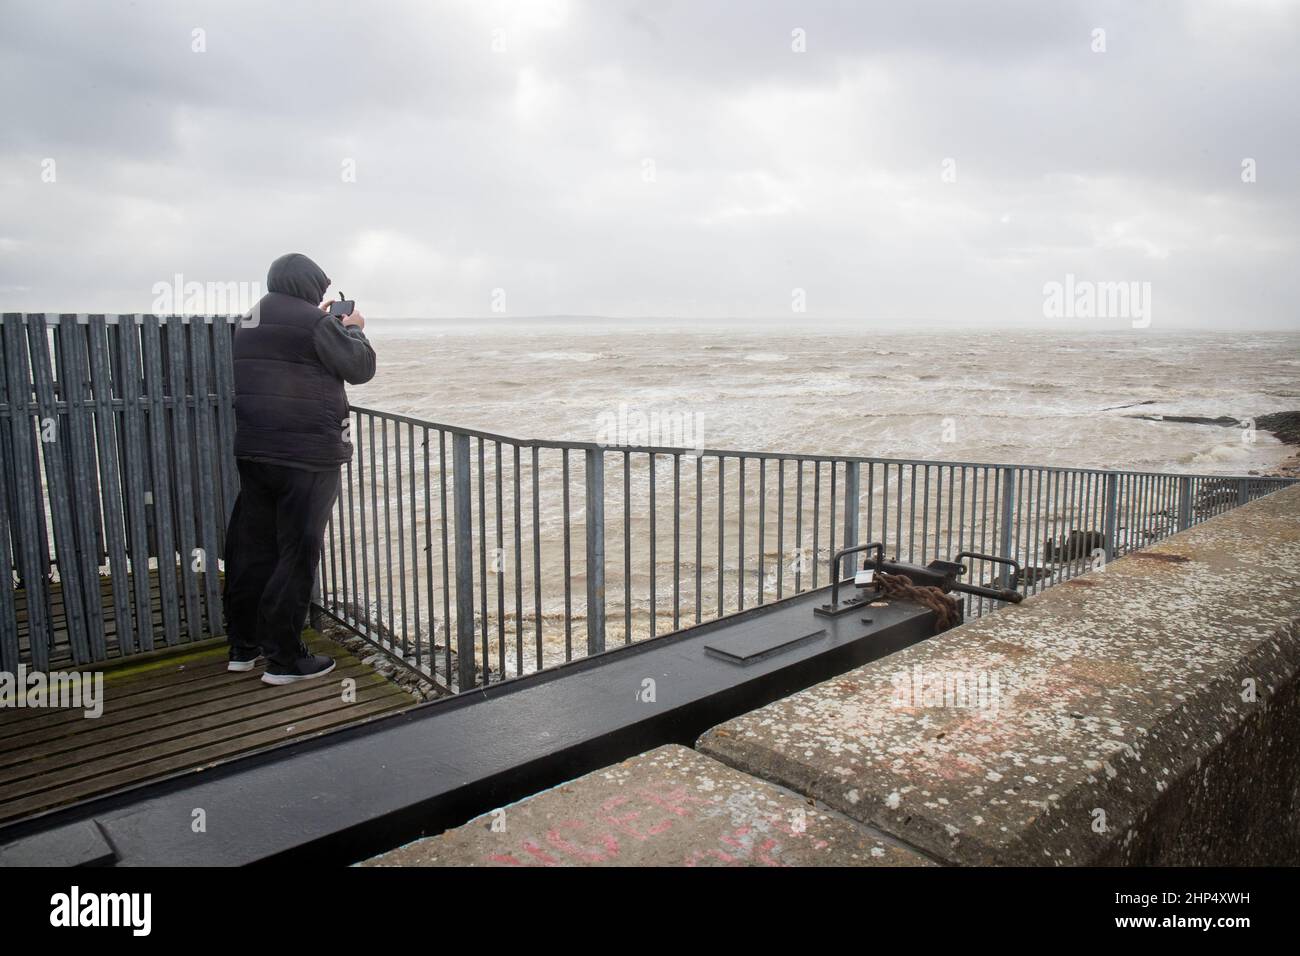 CANVEY ISLAND, ESSEX, FEBRUARY 18 2022, Storm Eunice hits the East Of England, The Met Office has issued two rare red warnings as the UK is hit by rain, snow and record-breaking 122 mph winds during the worst storm for 30 years. Credit: Lucy North/Alamy Live News Stock Photo